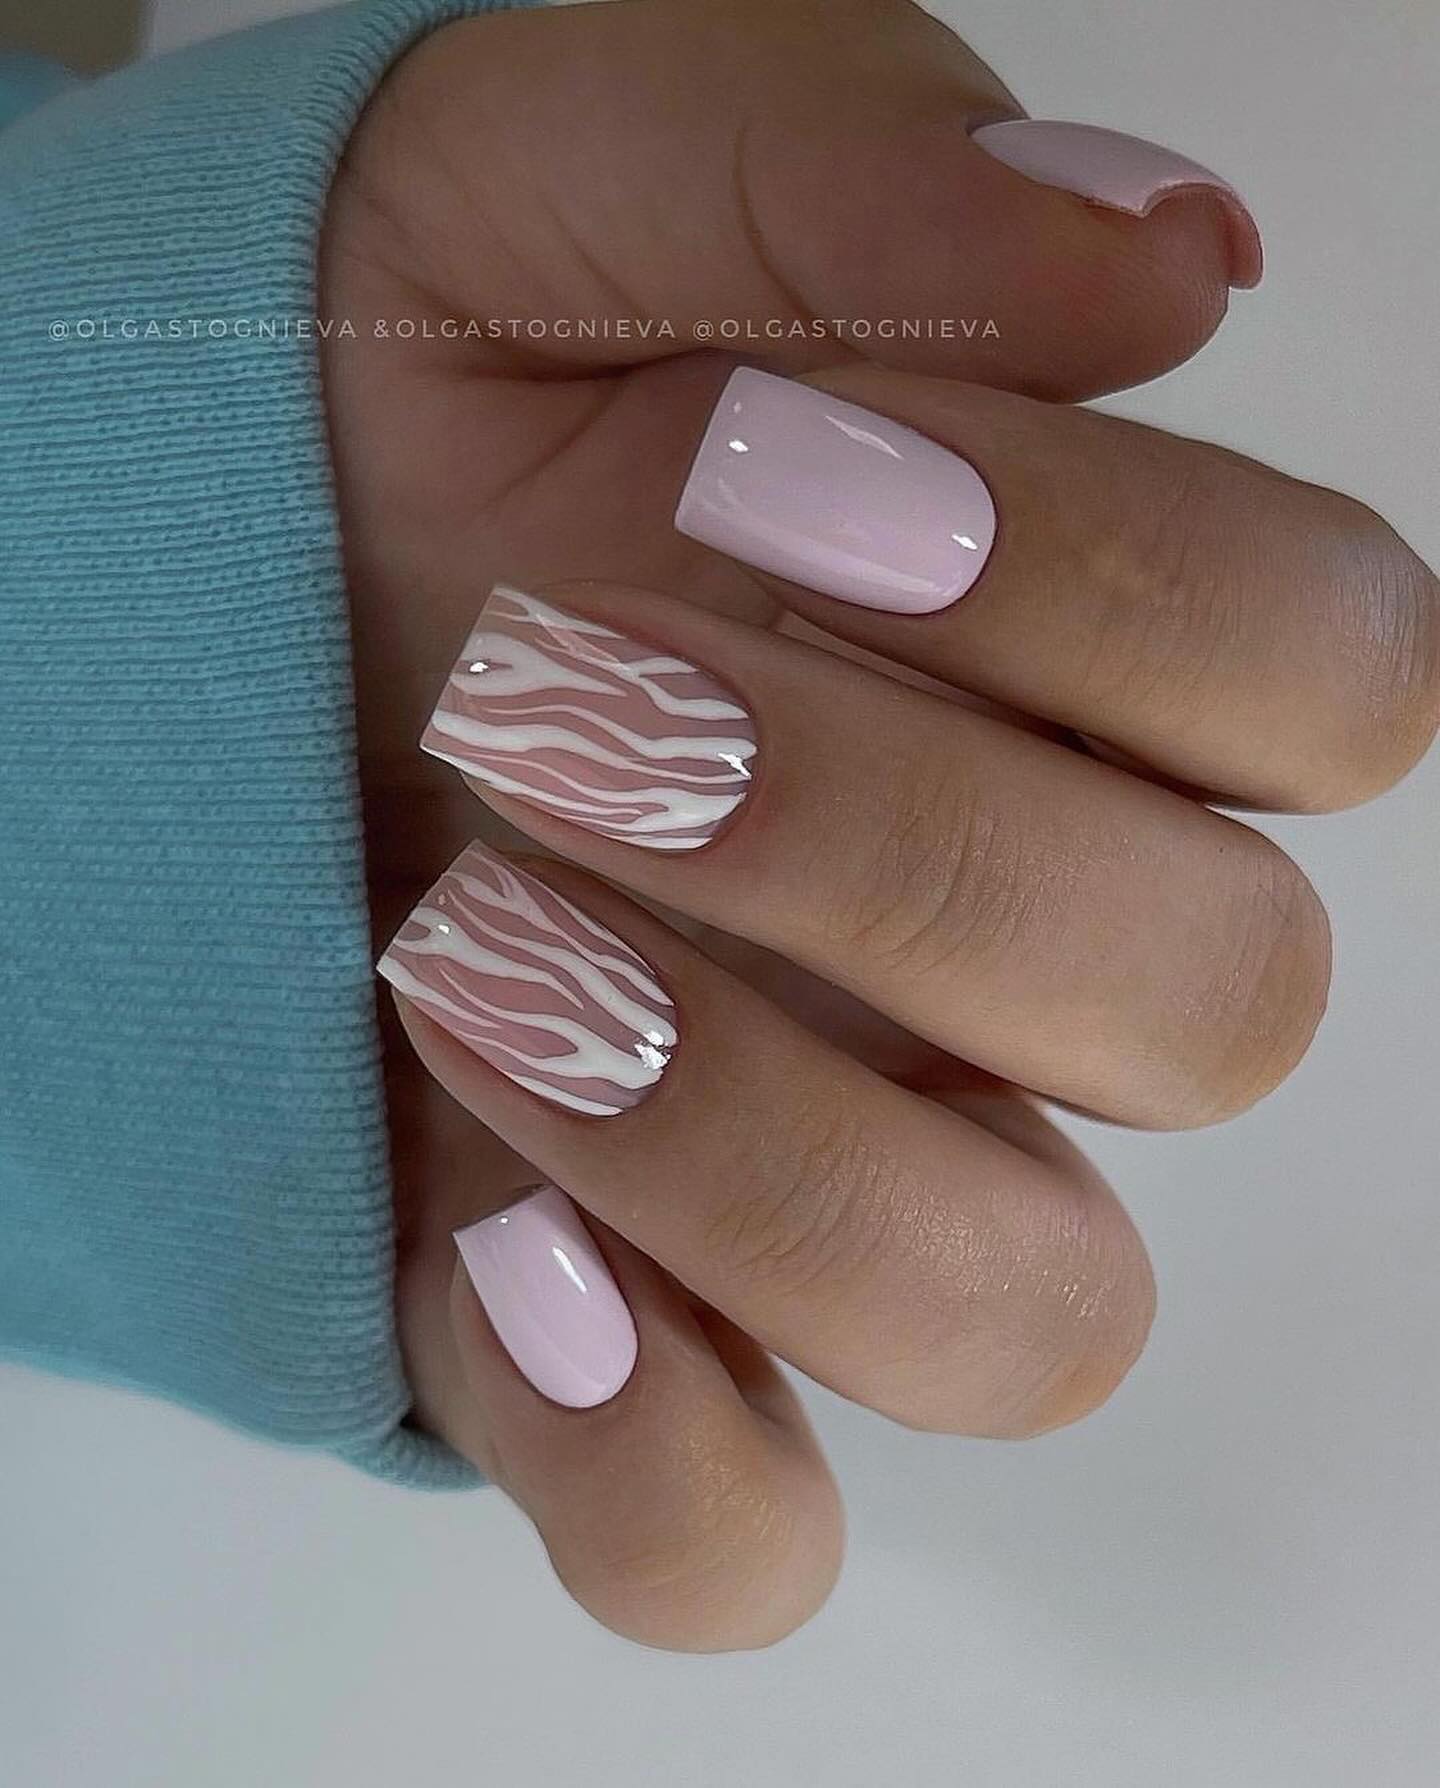 100+ Best Winter Nail Ideas And Designs To Try images 55